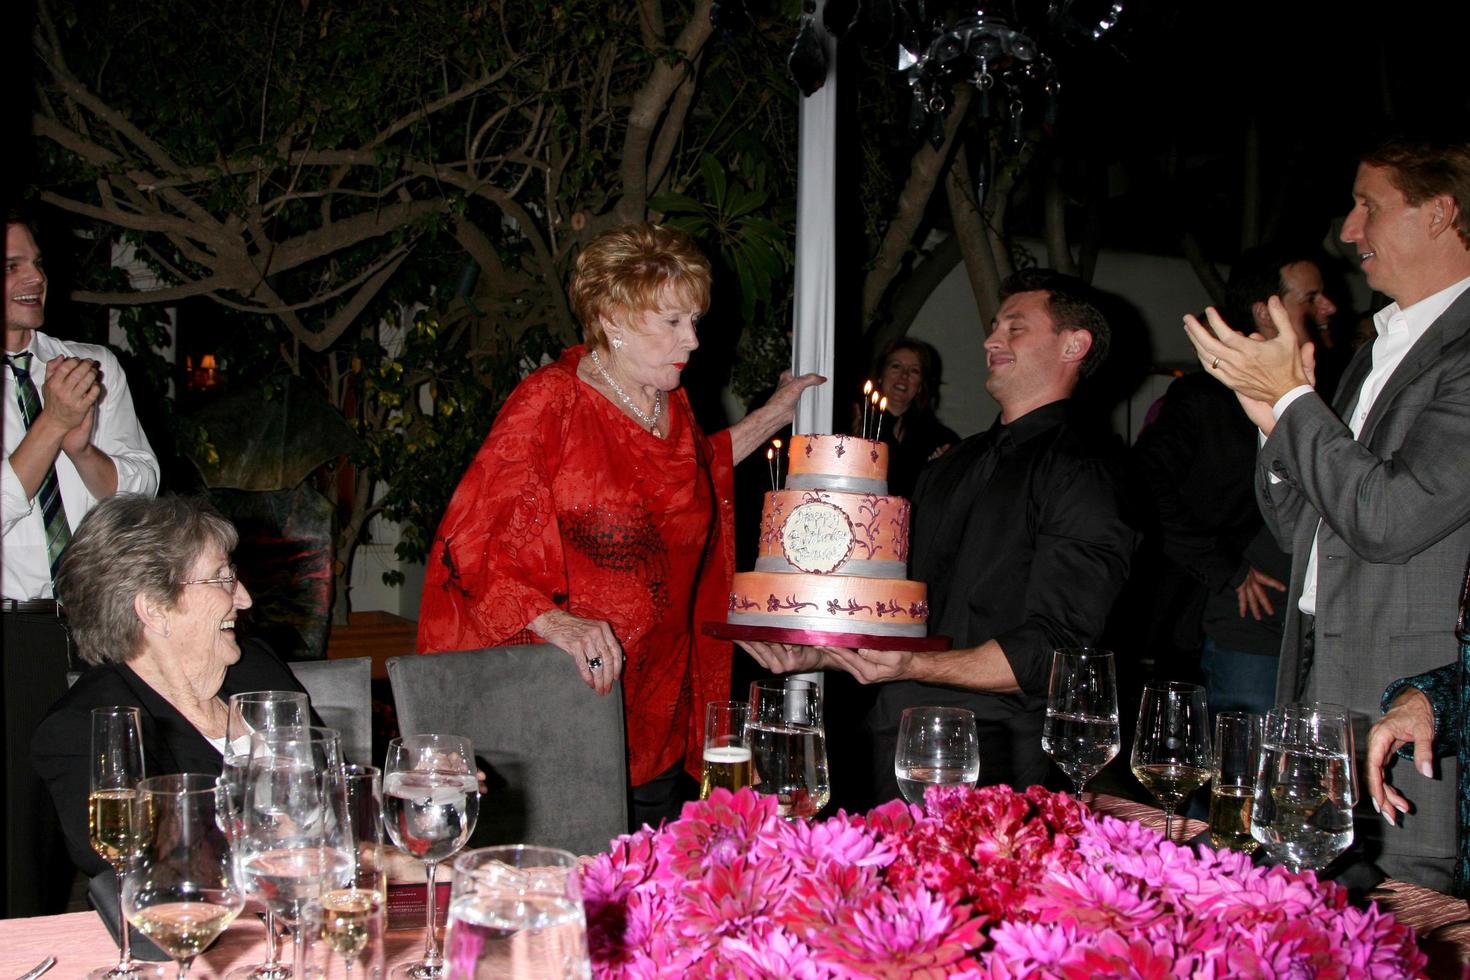 Jeanne Cooper with her birthday cake at a private 80th Birthday party for Jeanne Cooper hosted by Lee Bell at her home in Beverly Hills, CA on October 23, 2008 photo